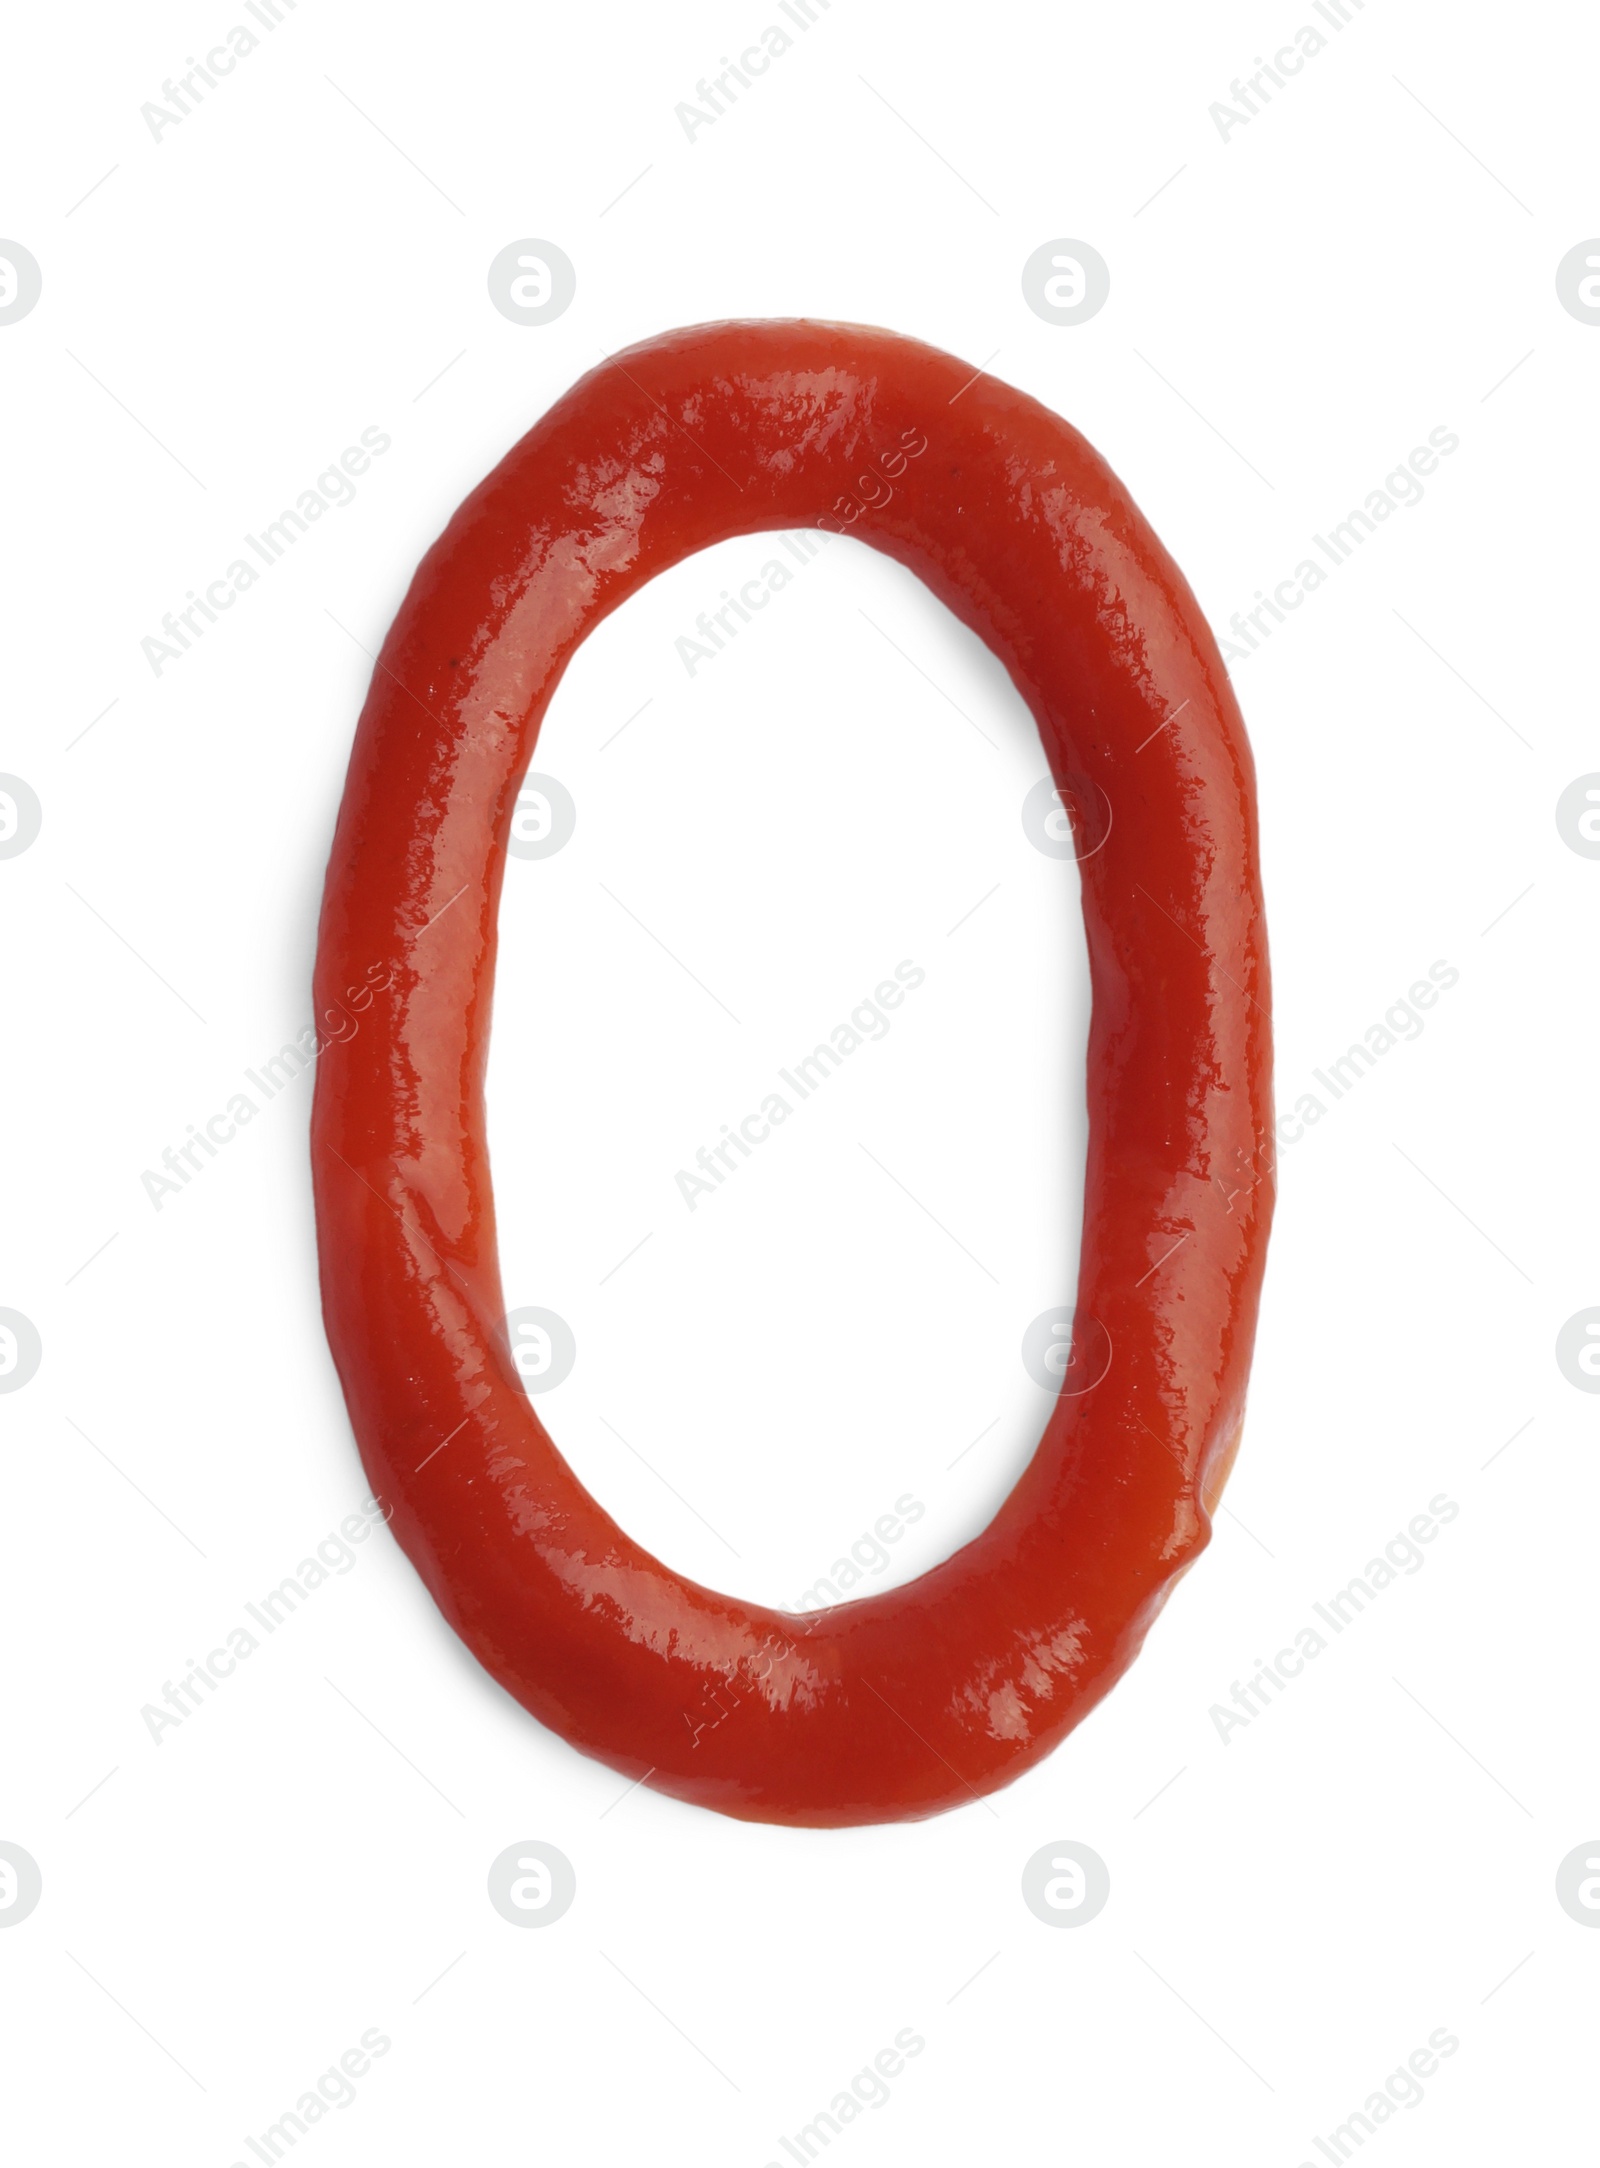 Photo of Number zero written by ketchup on white background